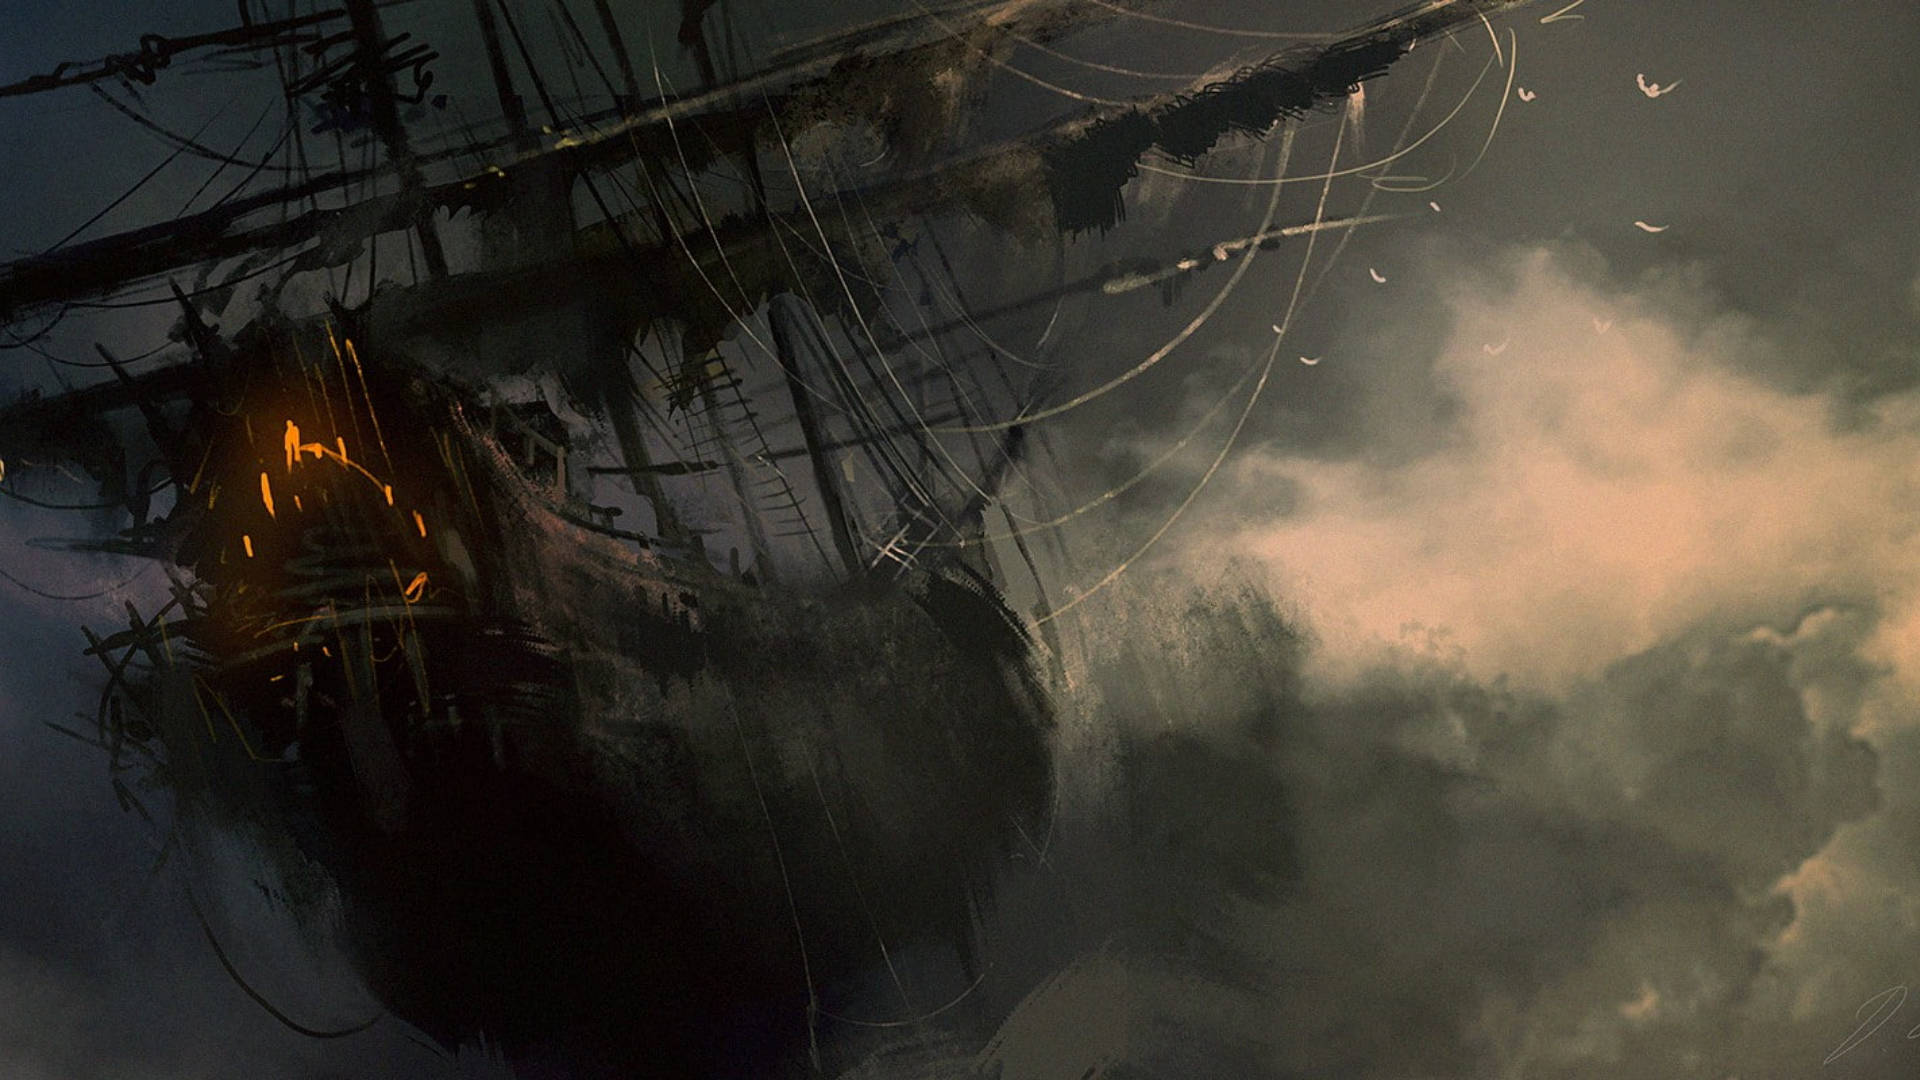 Aesthetic Ghost Ship Art Background